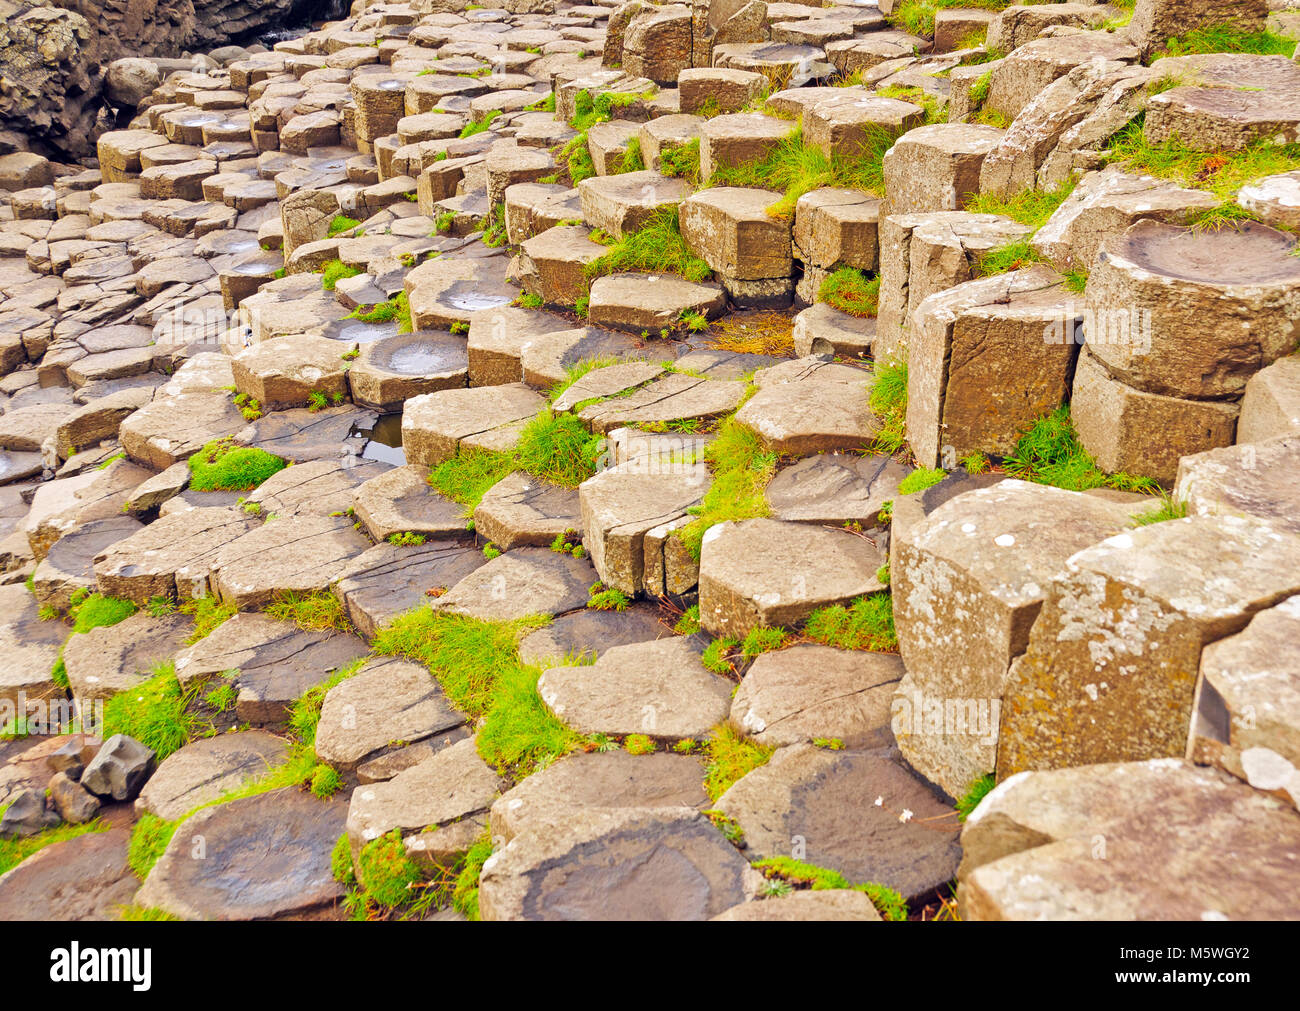 Details of the Columns in the Giant's Causeway in Northern Ireland Stock Photo